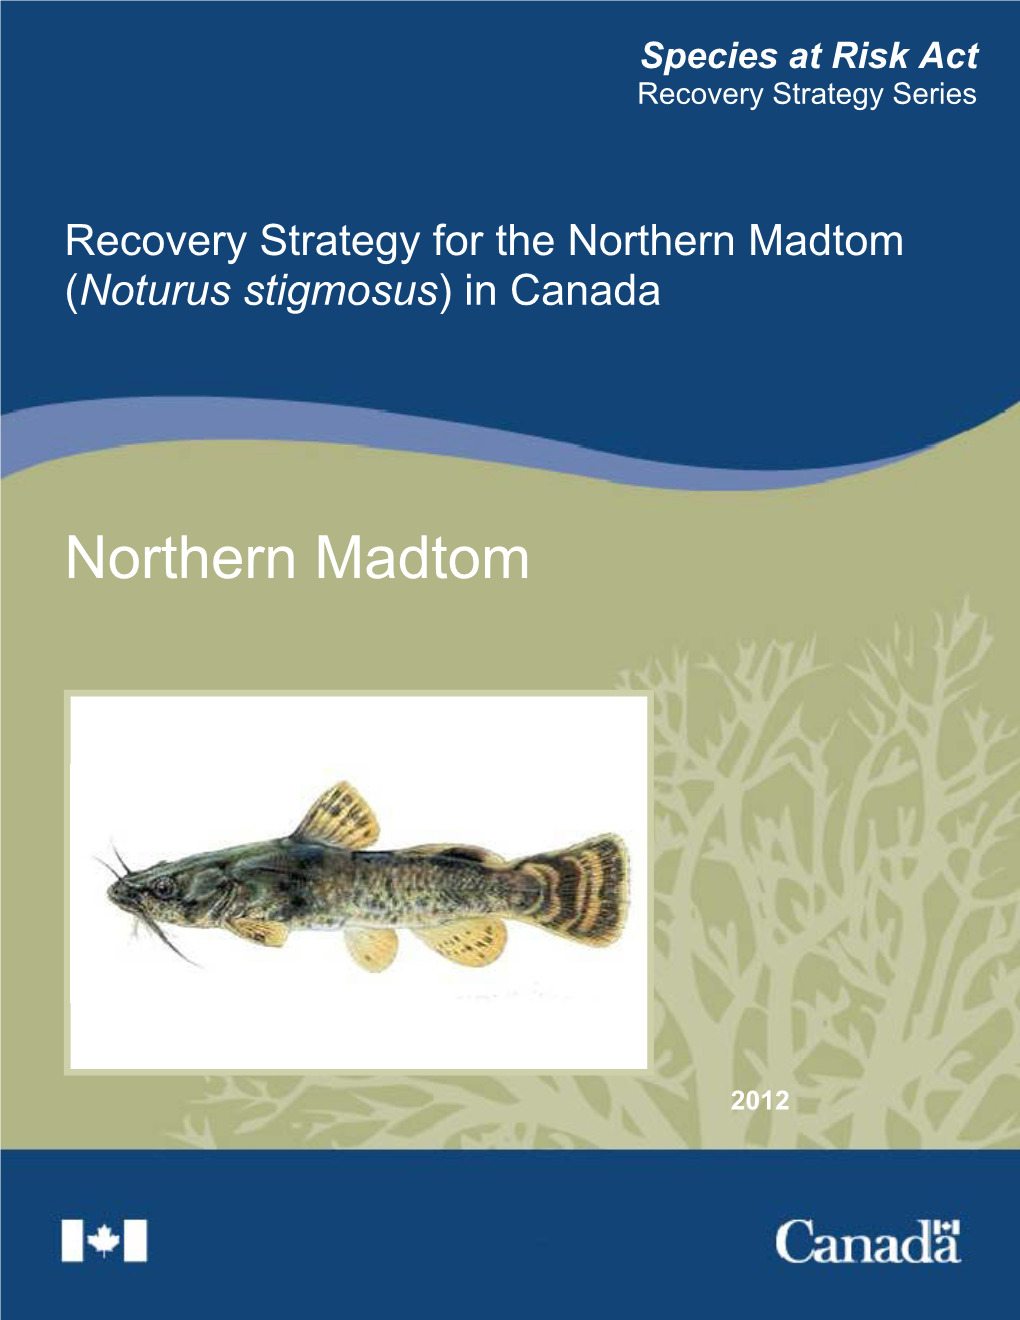 Recovery Strategy for Northern Madtom (Draft)